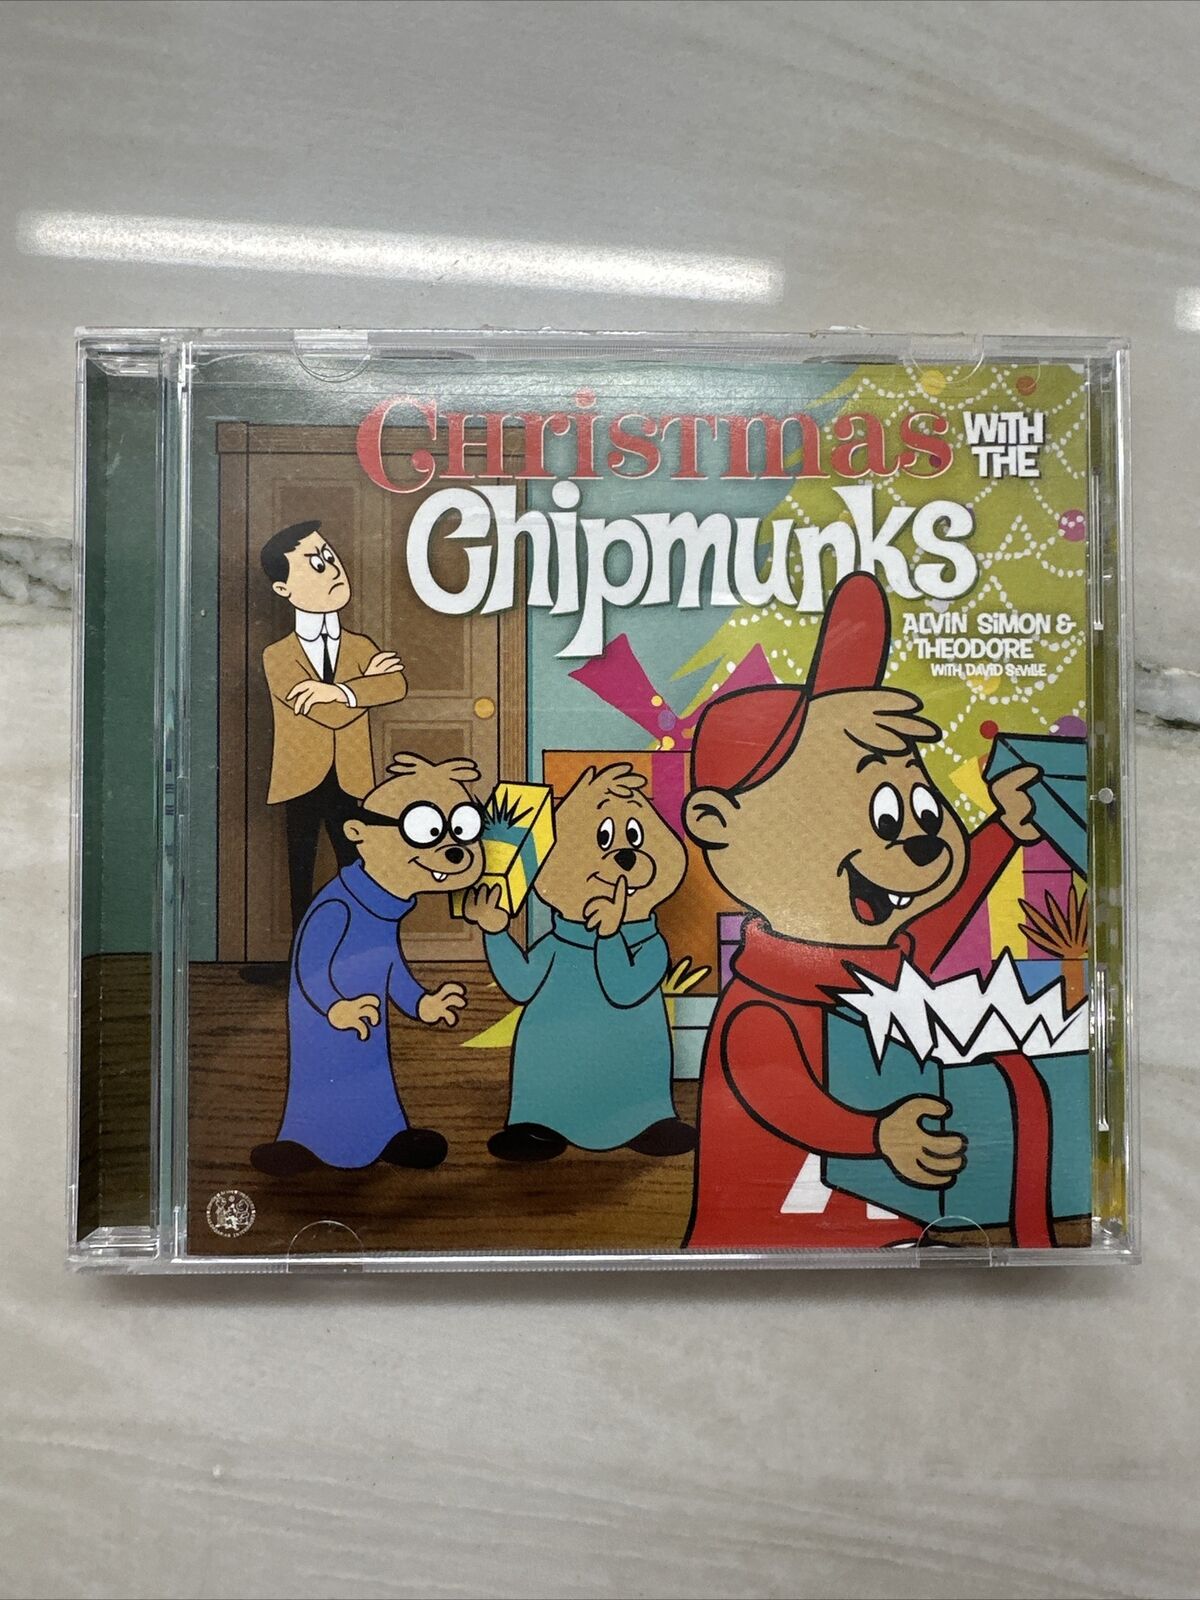 Christmas with the Chipmunks [Capitol 2008] by The Chipmunks (CD, 2008, Capitol)